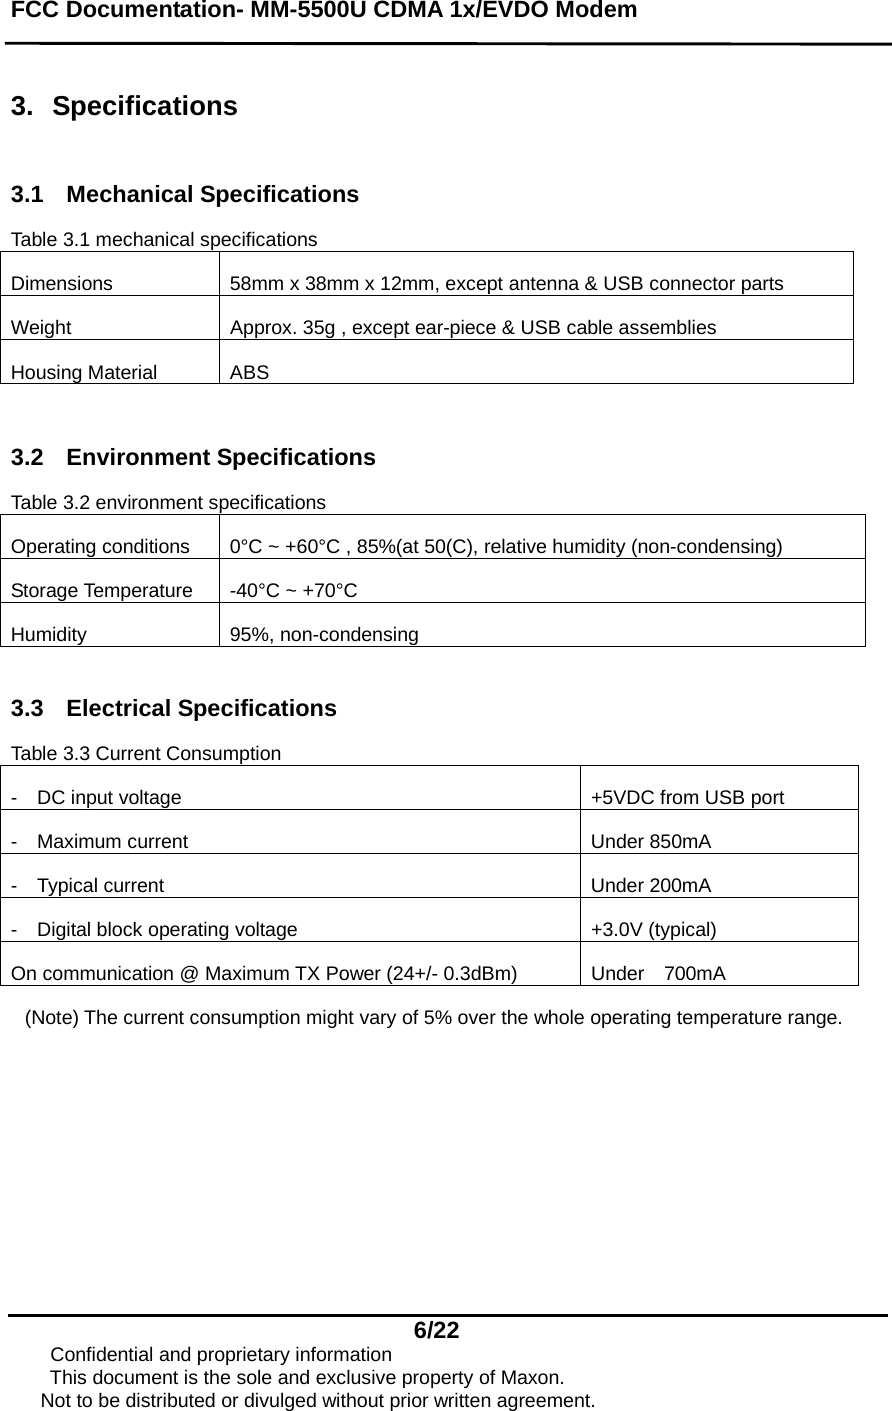 FCC Documentation- MM-5500U CDMA 1x/EVDO Modem   6/22      Confidential and proprietary information This document is the sole and exclusive property of Maxon.       Not to be distributed or divulged without prior written agreement.  3. Specifications  3.1 Mechanical Specifications  Table 3.1 mechanical specifications Dimensions  58mm x 38mm x 12mm, except antenna &amp; USB connector parts Weight  Approx. 35g , except ear-piece &amp; USB cable assemblies Housing Material  ABS  3.2 Environment Specifications Table 3.2 environment specifications Operating conditions    0°C ~ +60°C , 85%(at 50(C), relative humidity (non-condensing) Storage Temperature  -40°C ~ +70°C Humidity 95%, non-condensing  3.3 Electrical Specifications  Table 3.3 Current Consumption -    DC input voltage  +5VDC from USB port -  Maximum current   Under 850mA -  Typical current   Under 200mA -  Digital block operating voltage   +3.0V (typical) On communication @ Maximum TX Power (24+/- 0.3dBm)  Under    700mA   (Note) The current consumption might vary of 5% over the whole operating temperature range.   